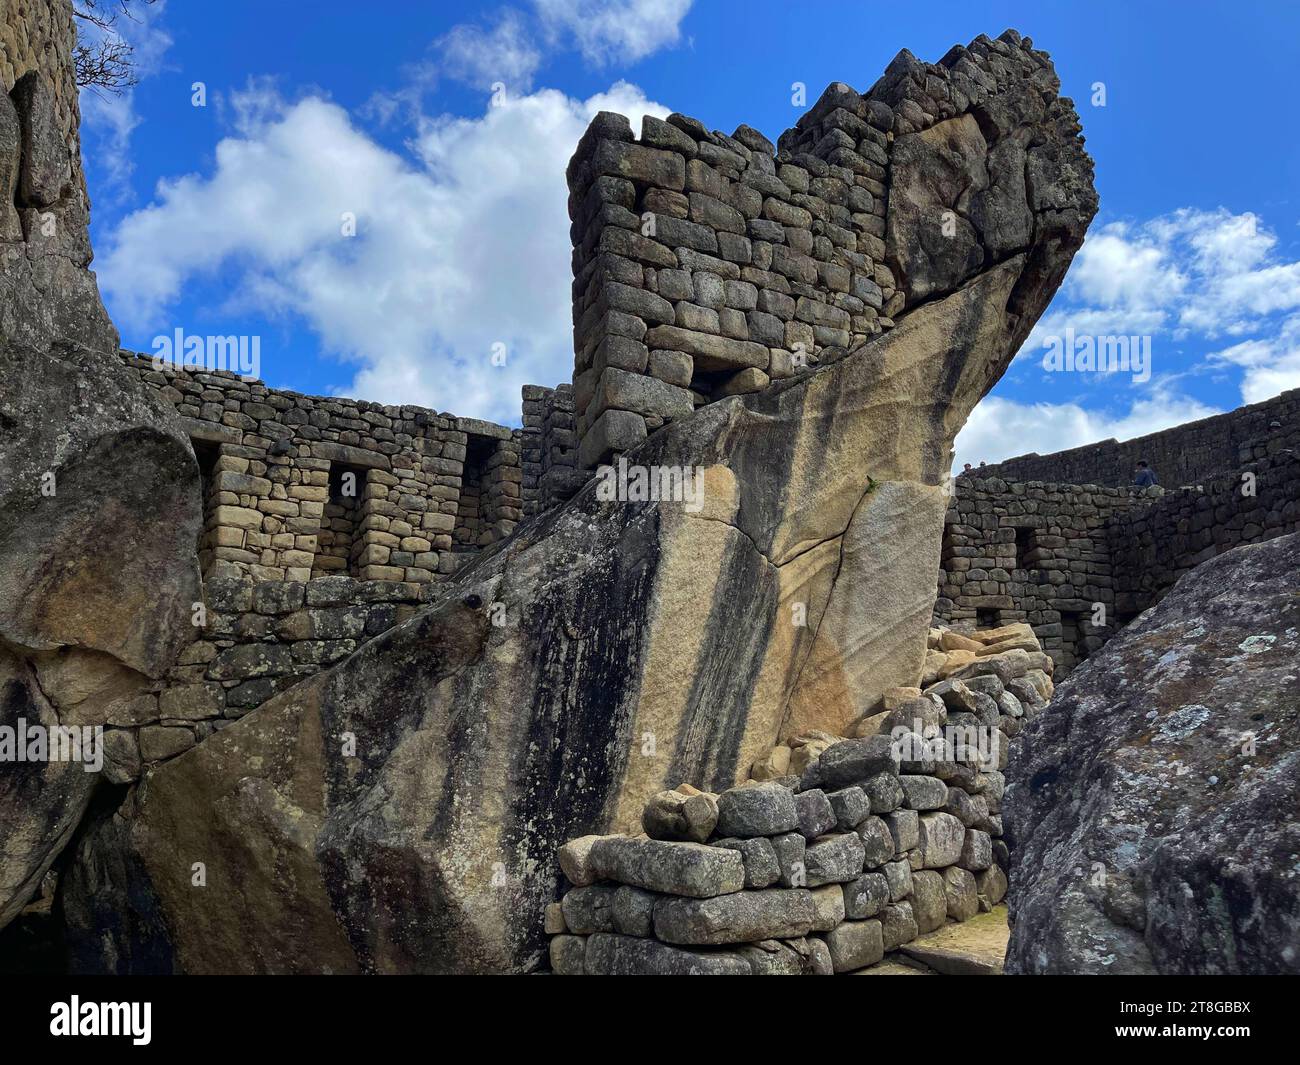 Ruins of the ancient Temple of the Condor archaeological site, located in Peru, Machu Picchu Stock Photo